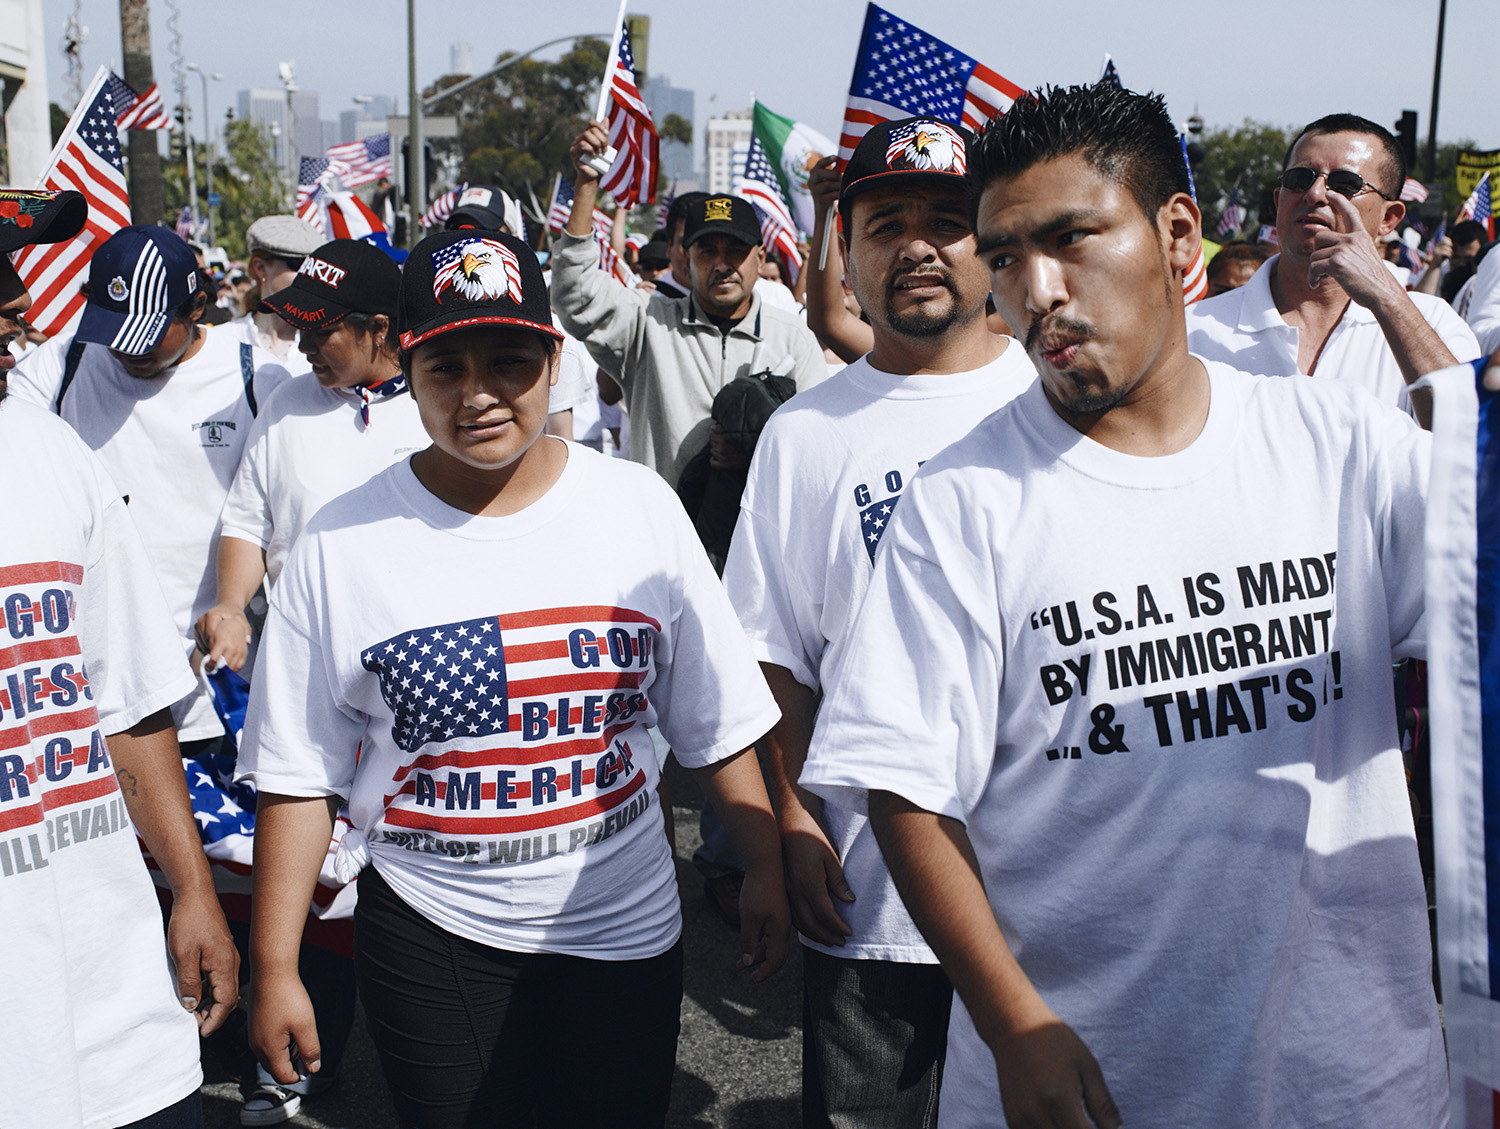 Protesters at an immigration march, american flags in background